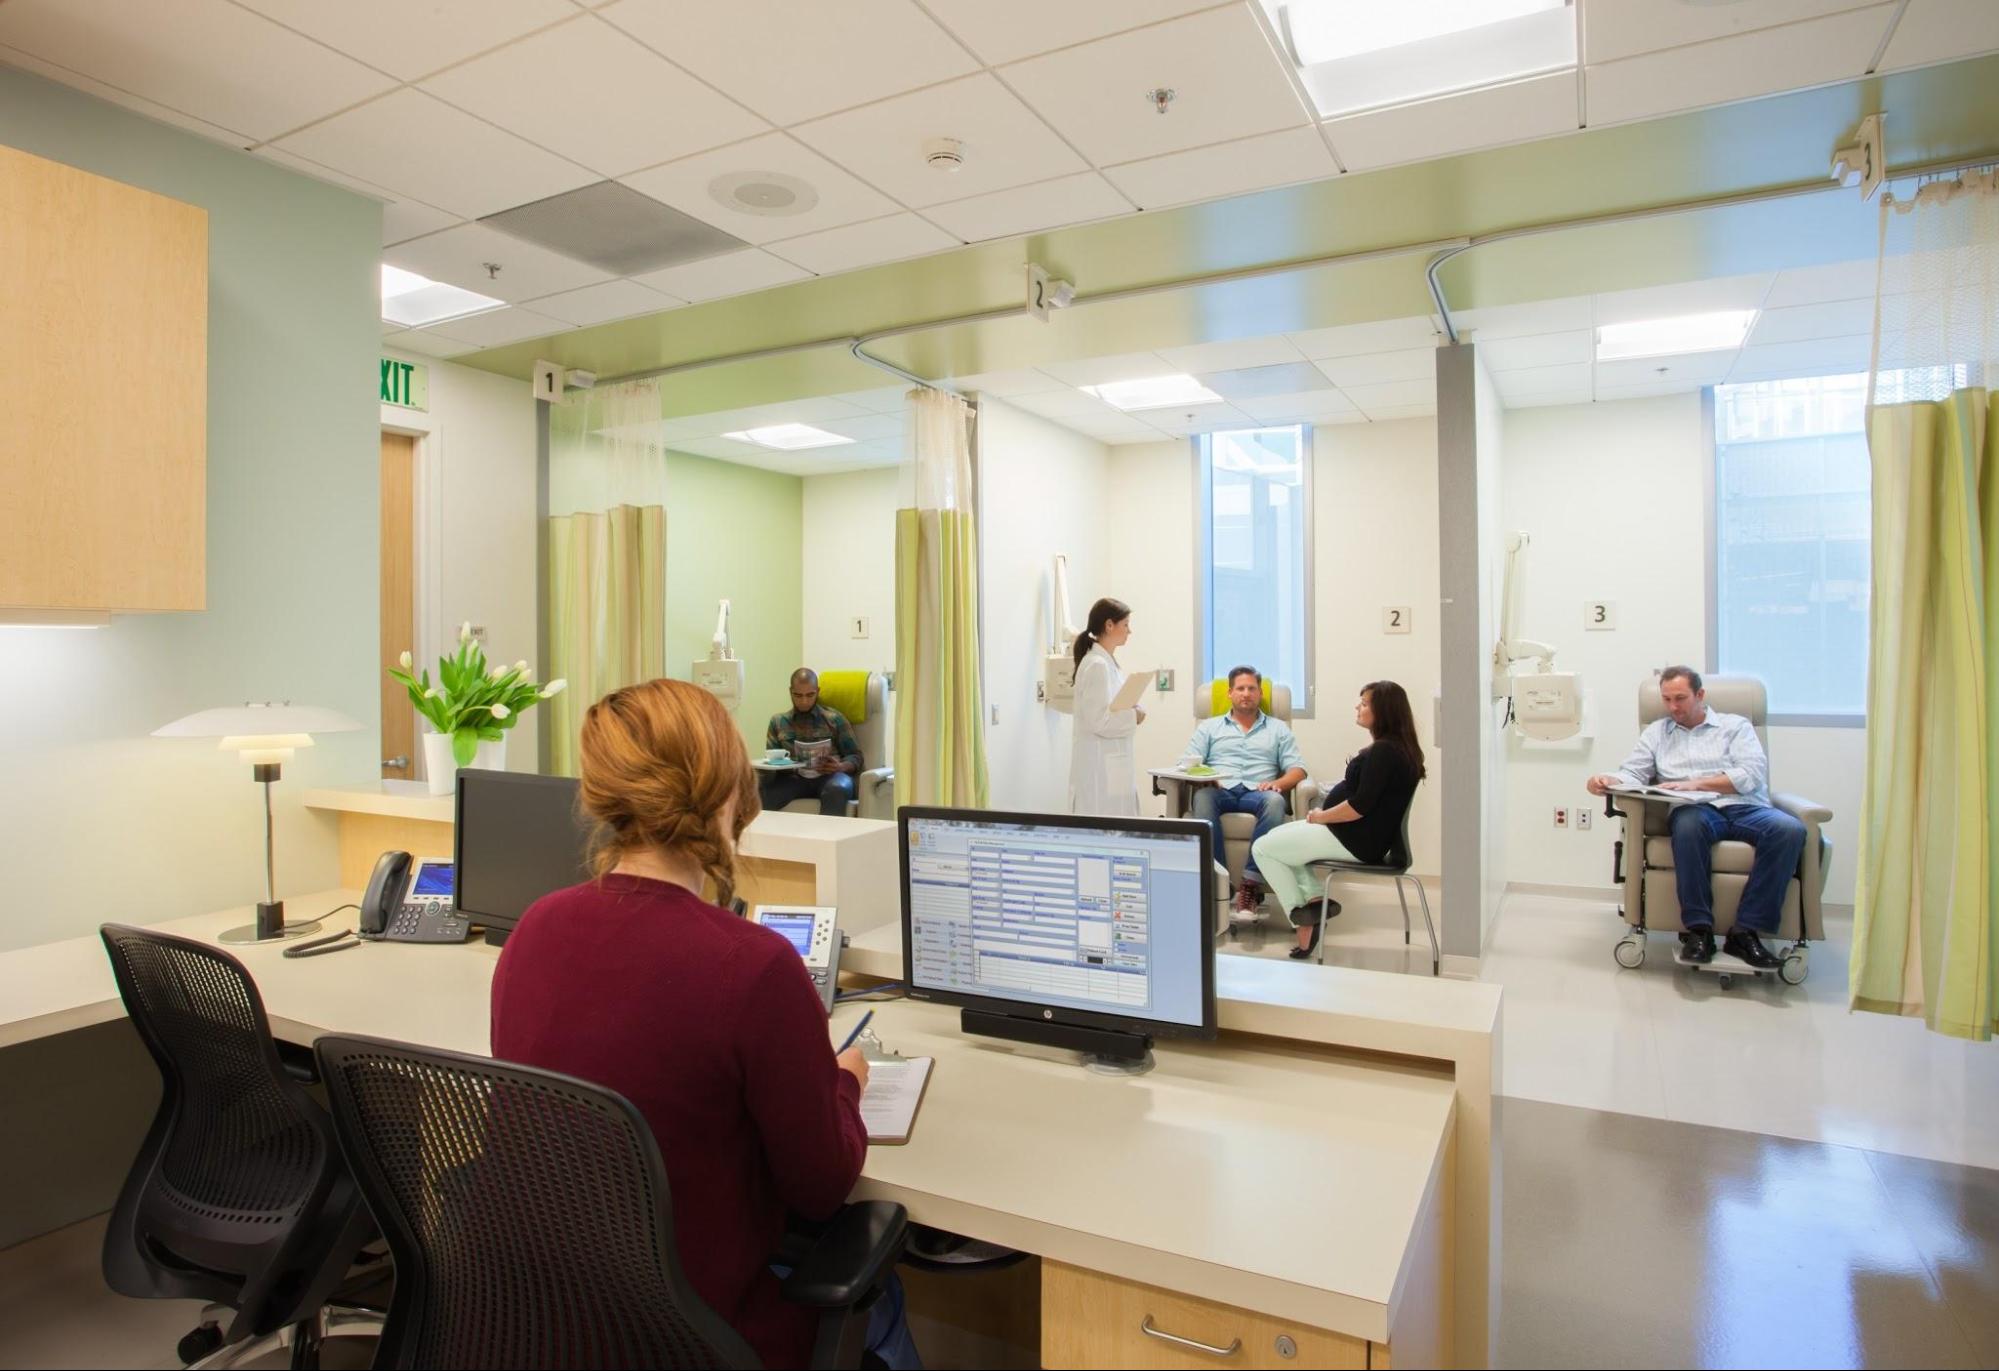 Healthcare facility design is focused on patient happiness.